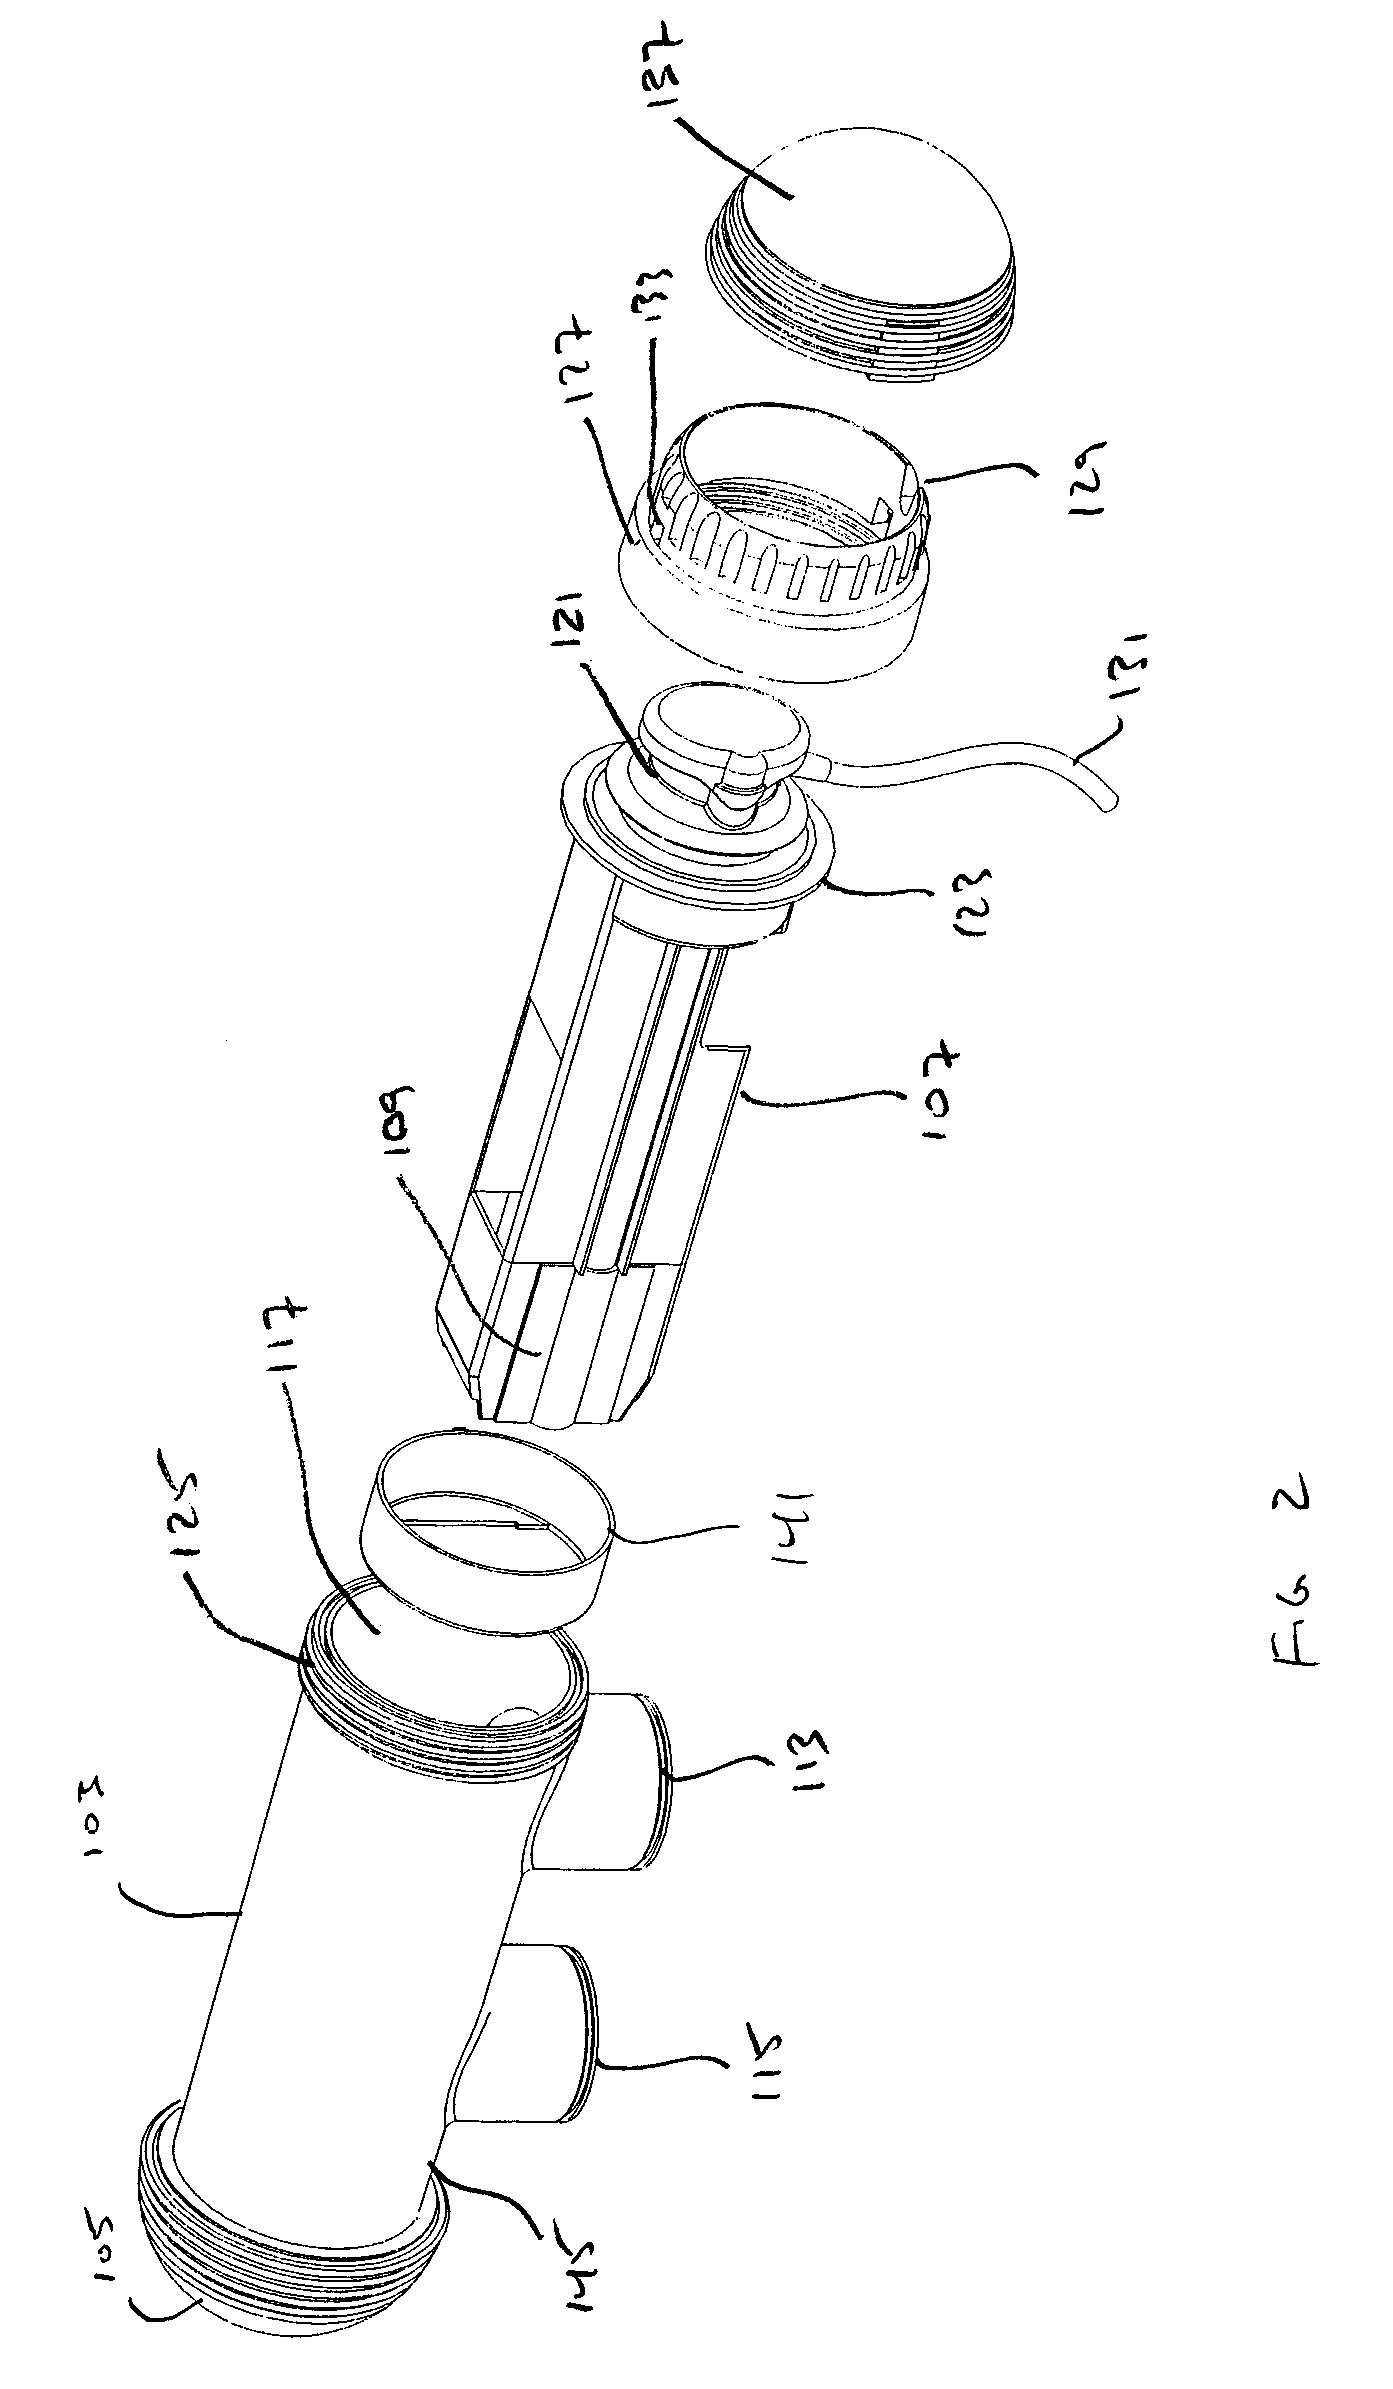 Replaceable chlorinator electrode assembly